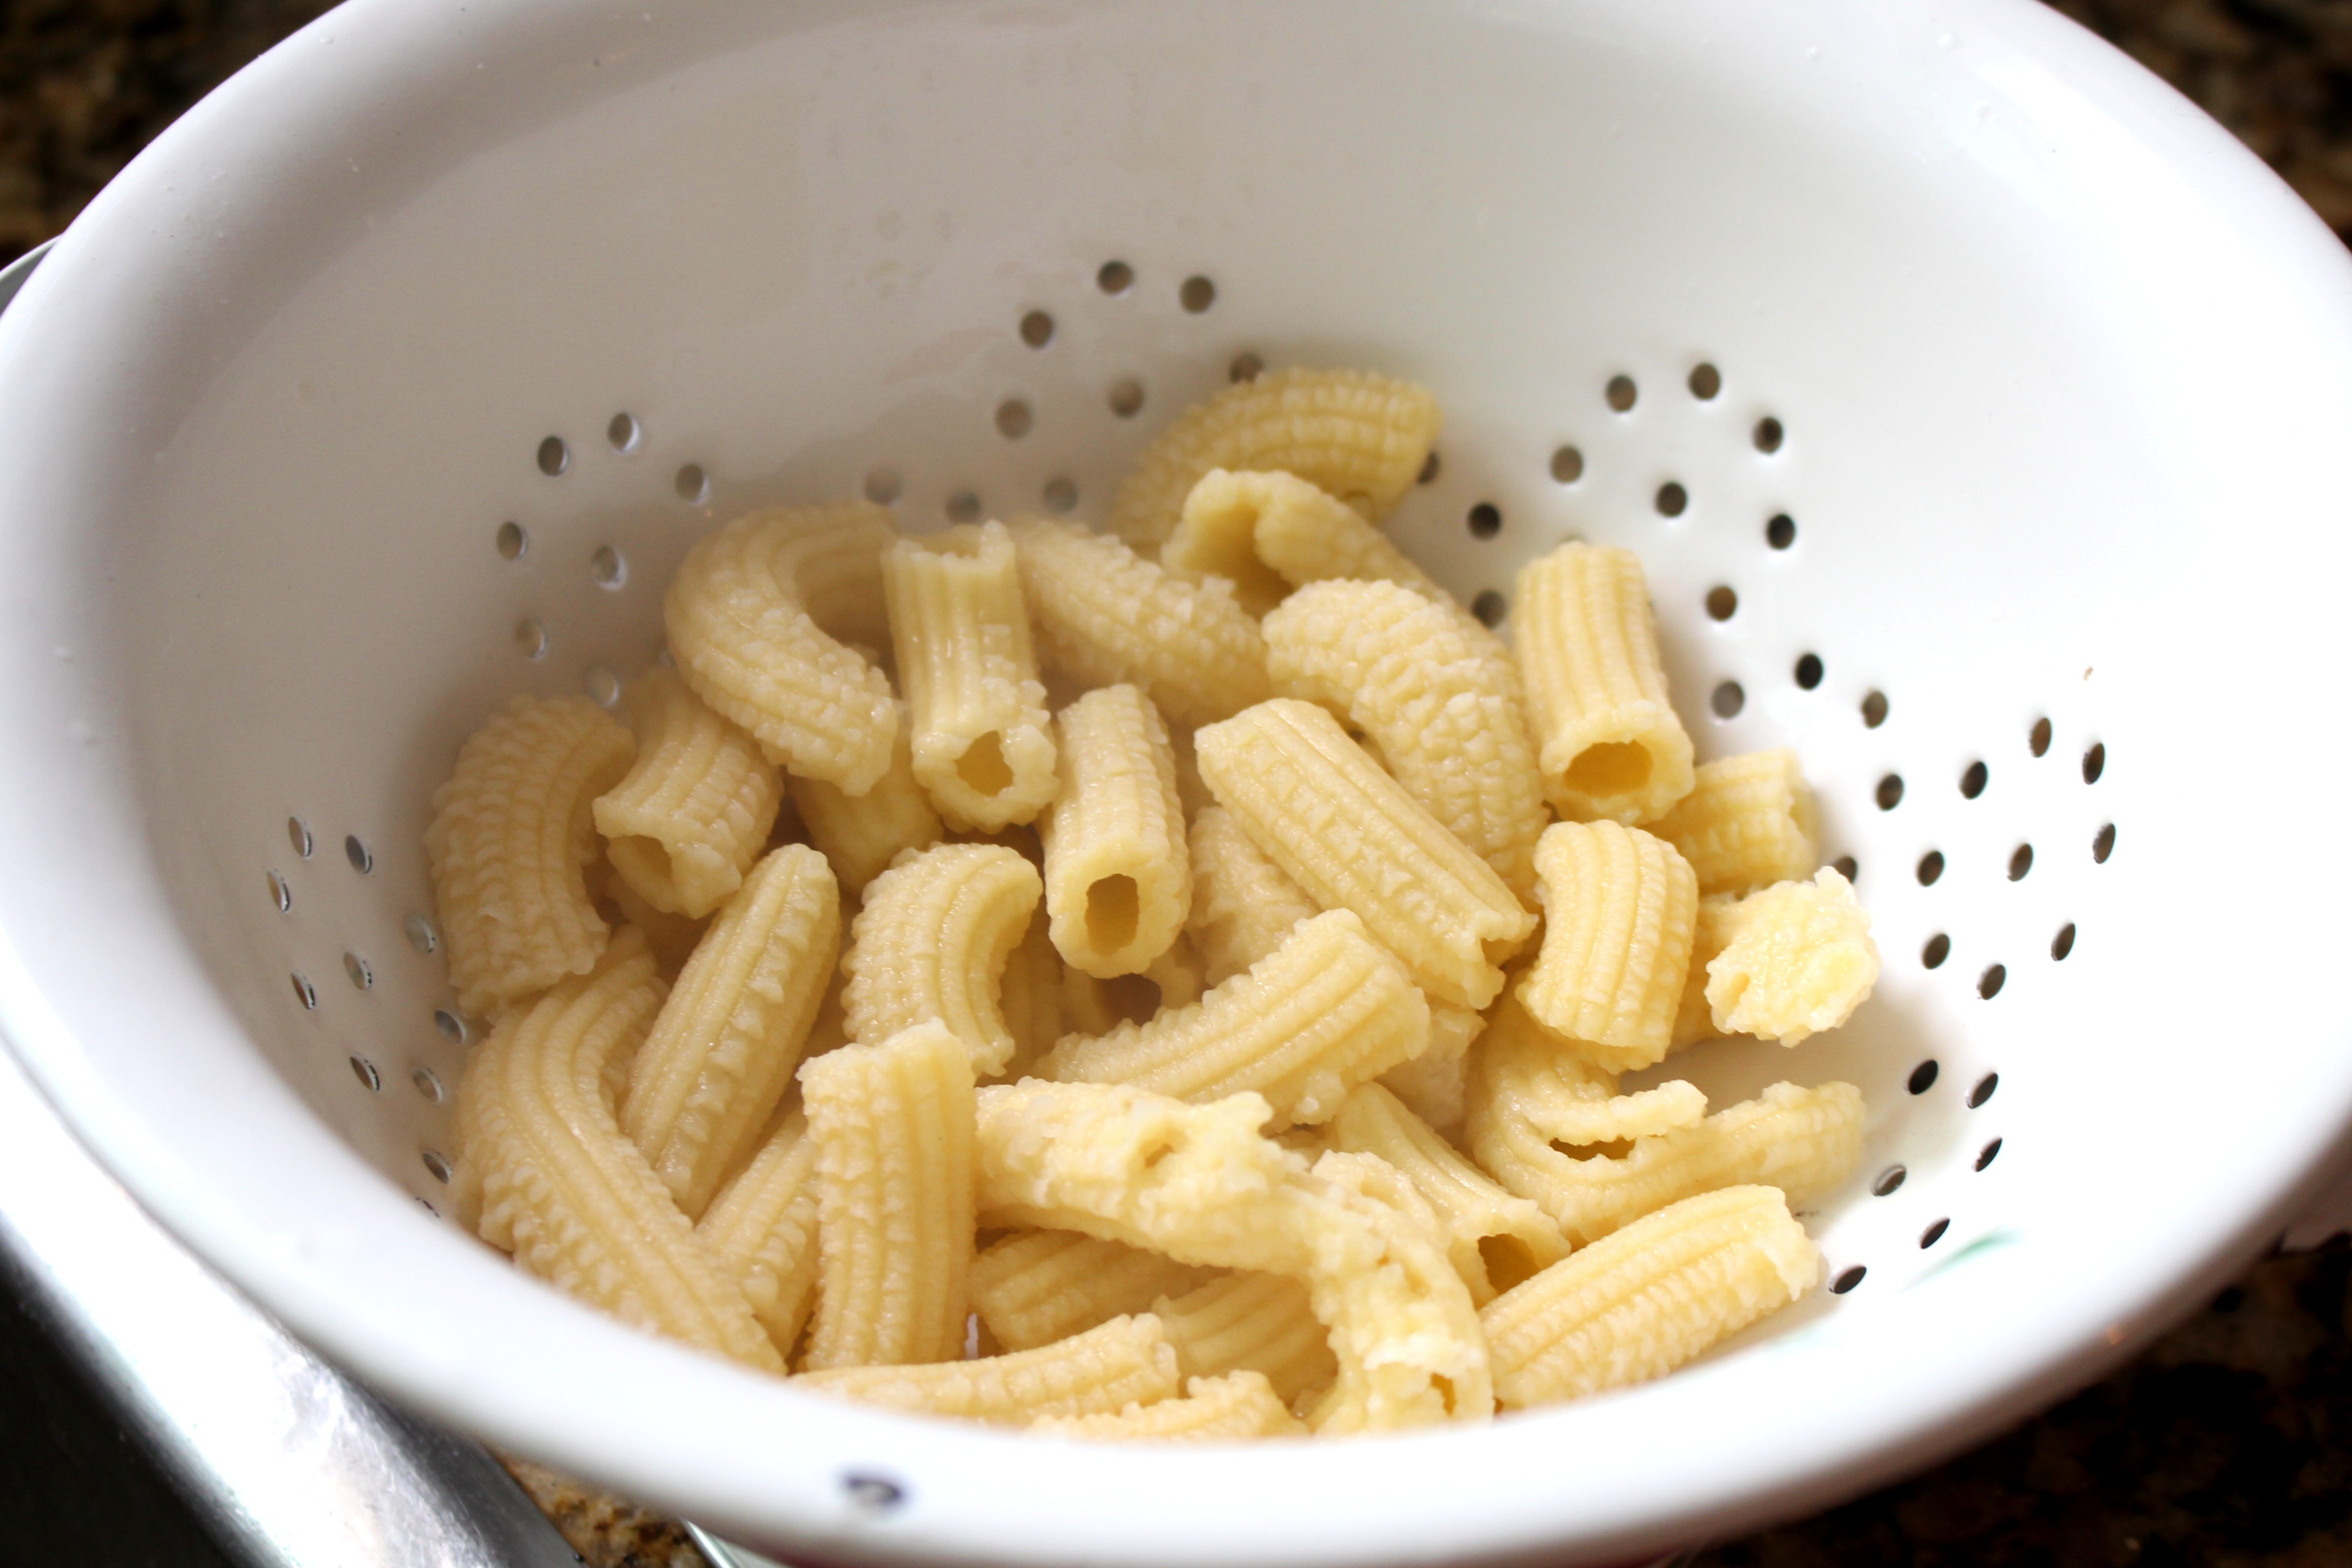 Product Testing: Philips Pasta Maker Take 2 - Suzie The Foodie